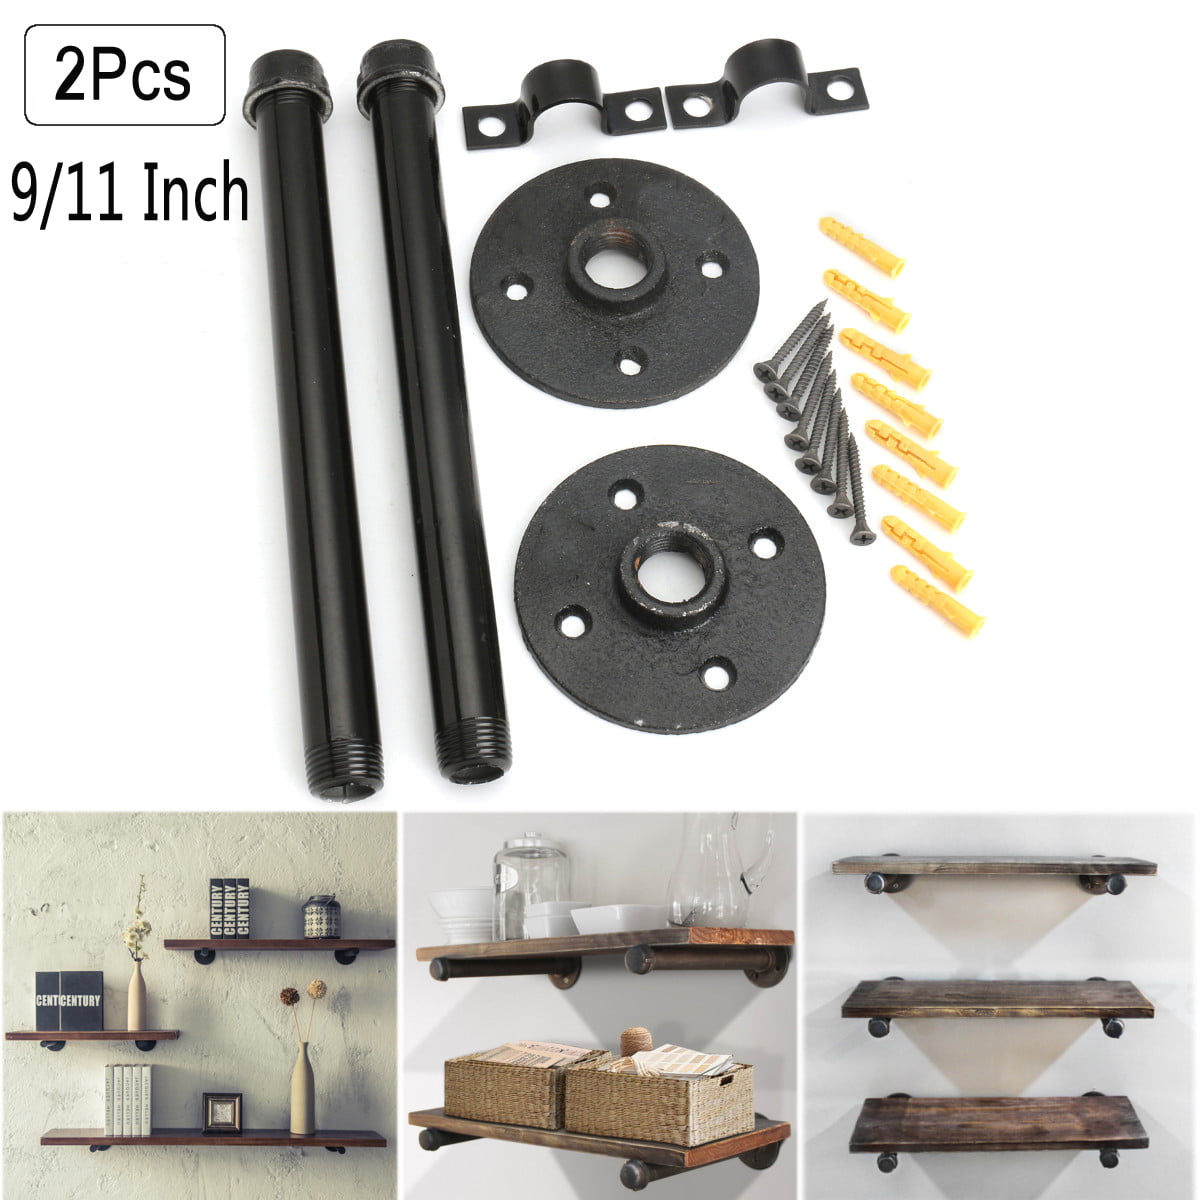 10 Inch DIY Rustic/Chic and Vintage Decor Floating Shelves Complete Display Set ½ Inch Flange NODNAL Co. 4 Pack 10” Iron Pipe Shelf Mounting Brackets Industrial Black Steel Iron Straight Shelves